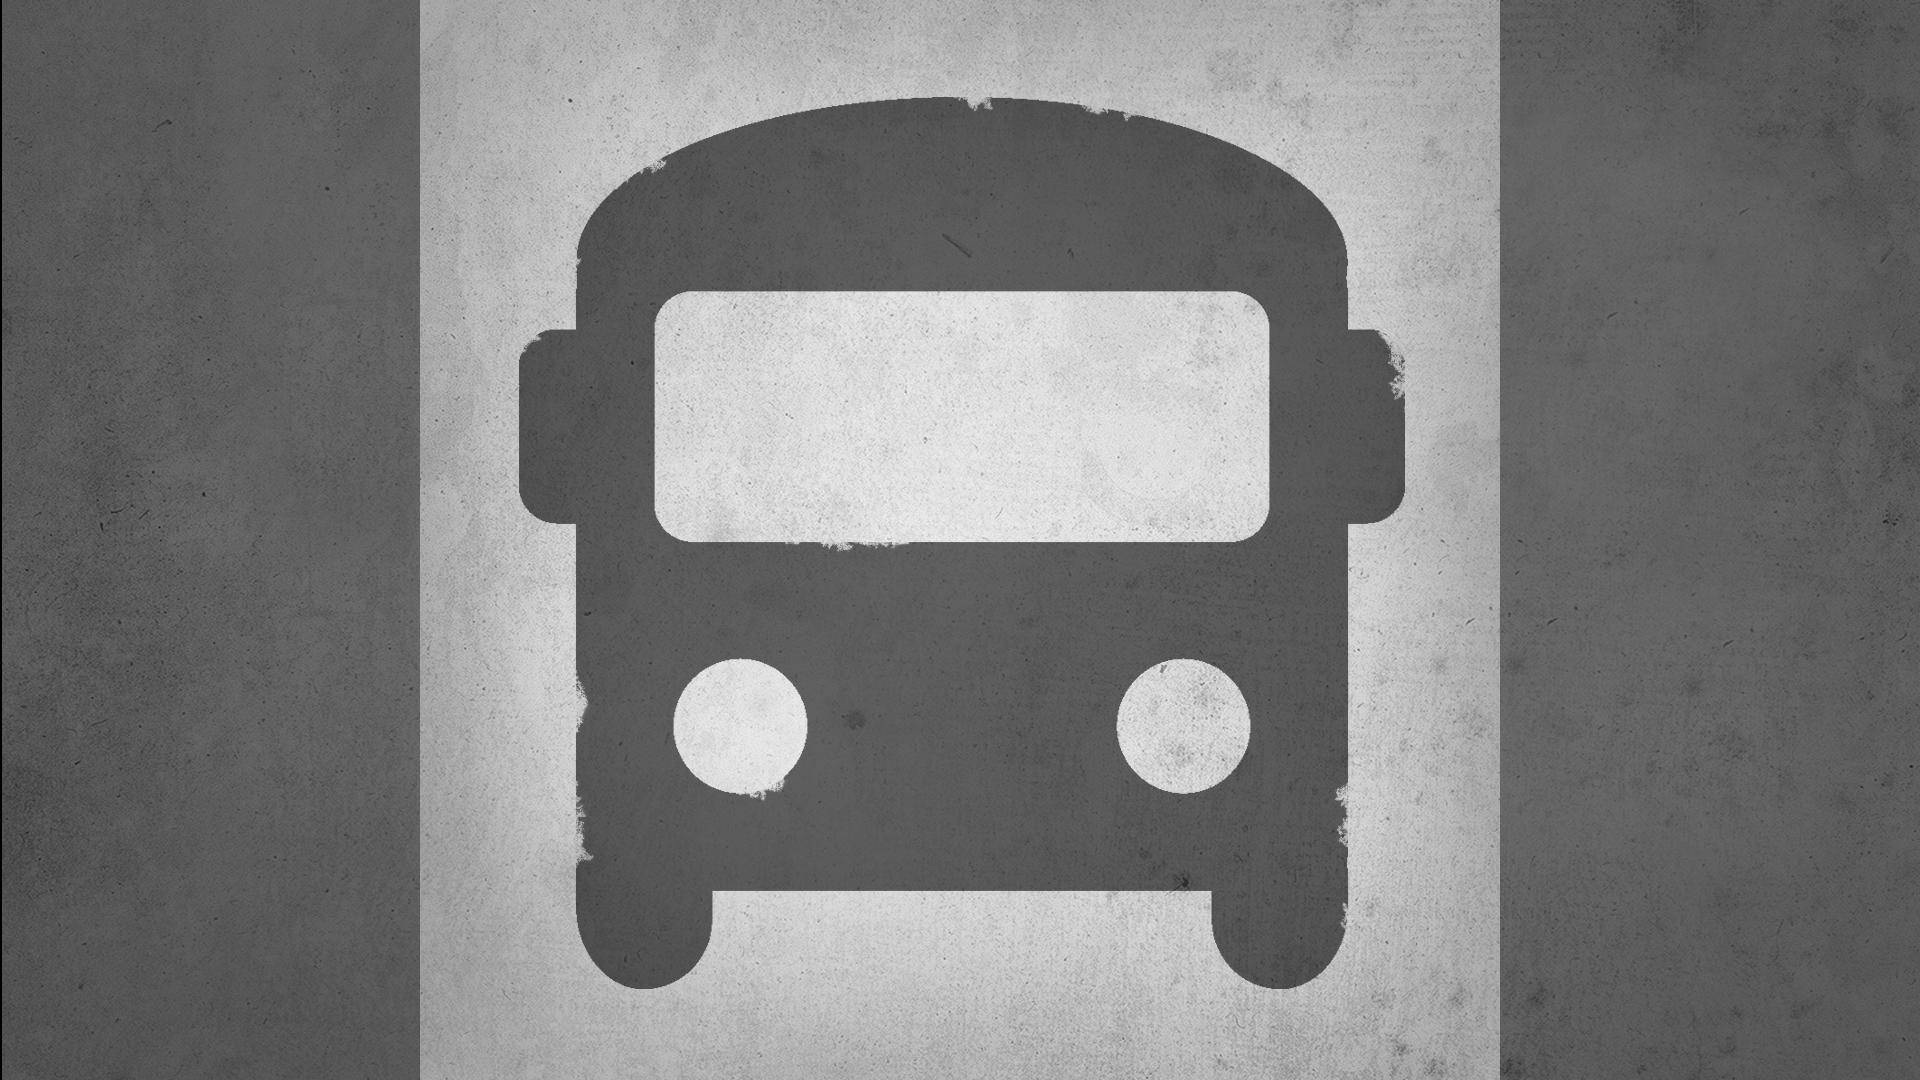 Icon for Bus cracker